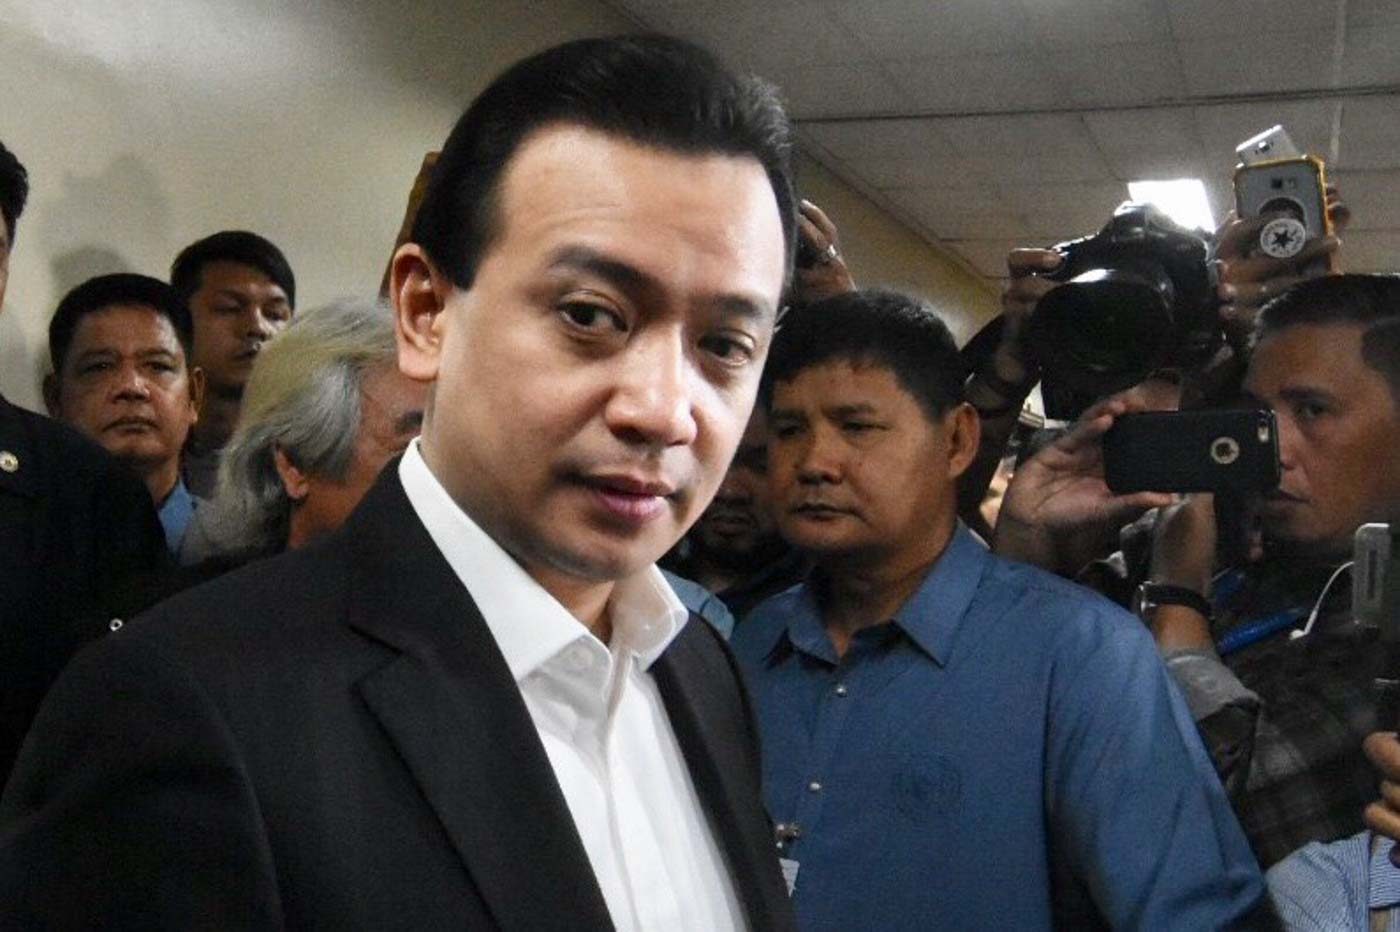 Military can arrest Trillanes without warrant – DND